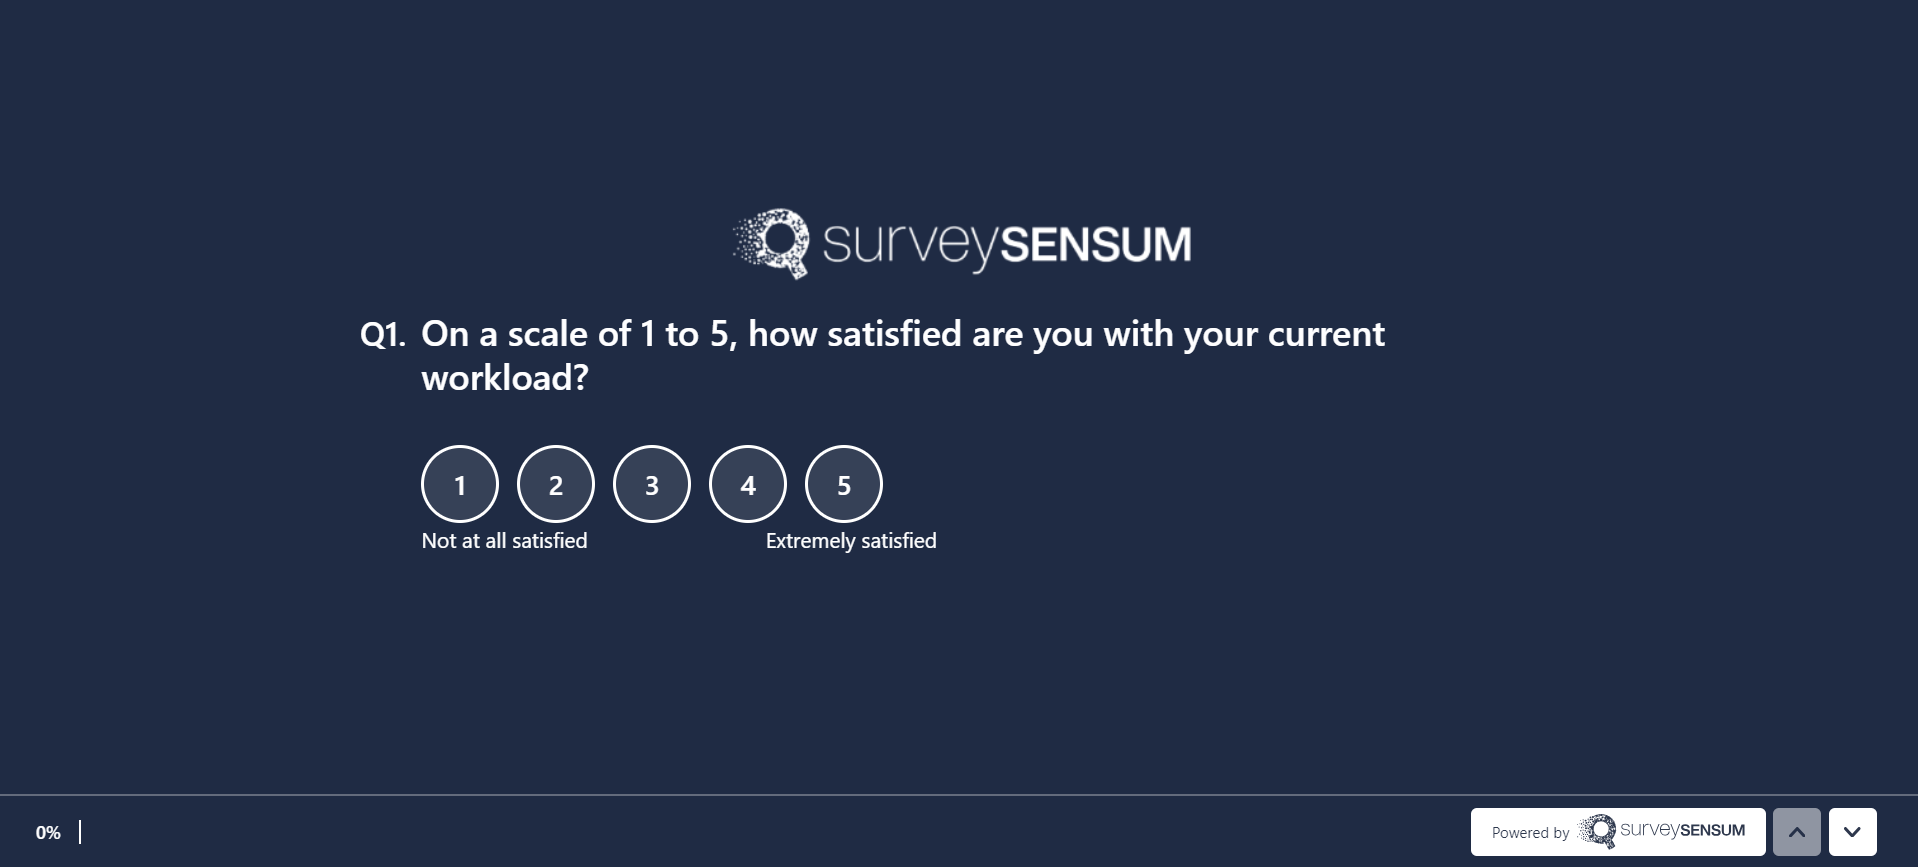 This is the image of an employee satisfaction survey where a user is being asked to rate their satisfaction, on a scale of 1-5, with their current workload. 